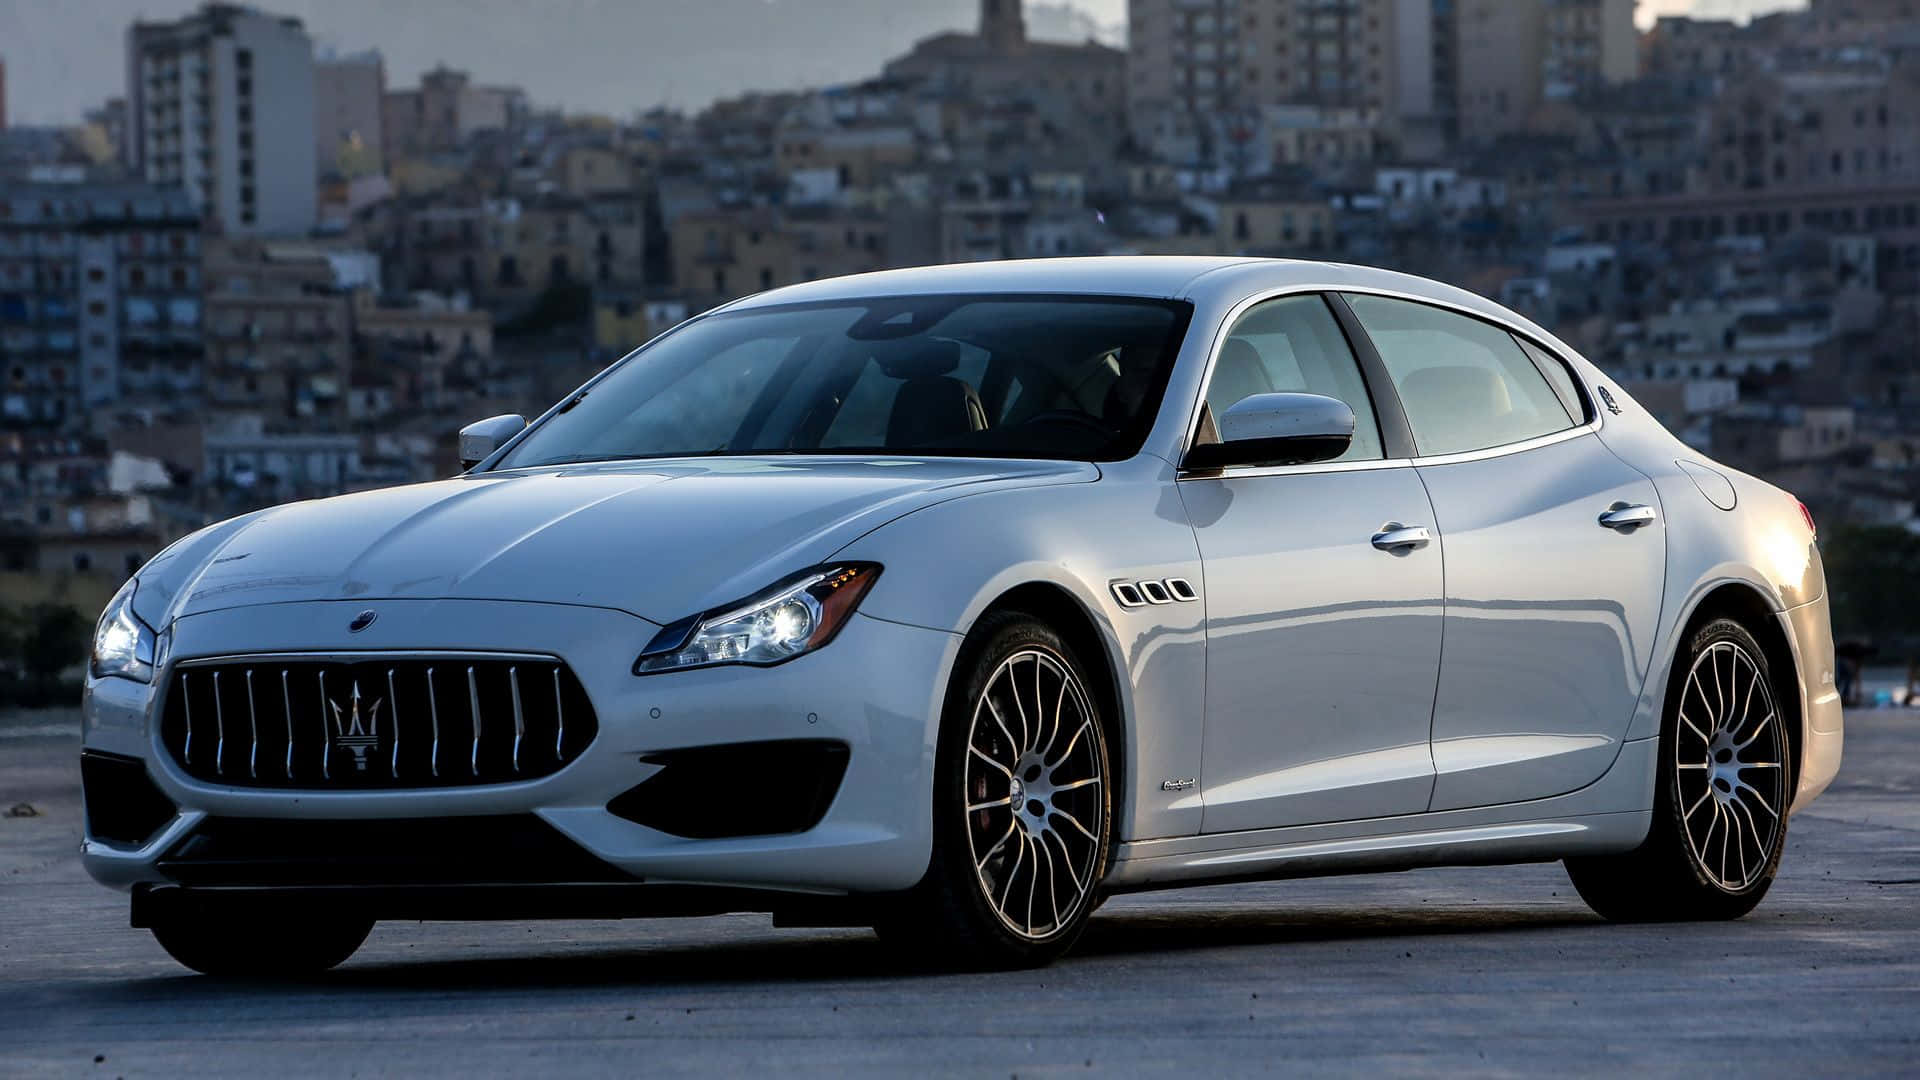 Caption: The Ultimate Blend Of Performance And Luxury - Maserati Quattroporte. Wallpaper